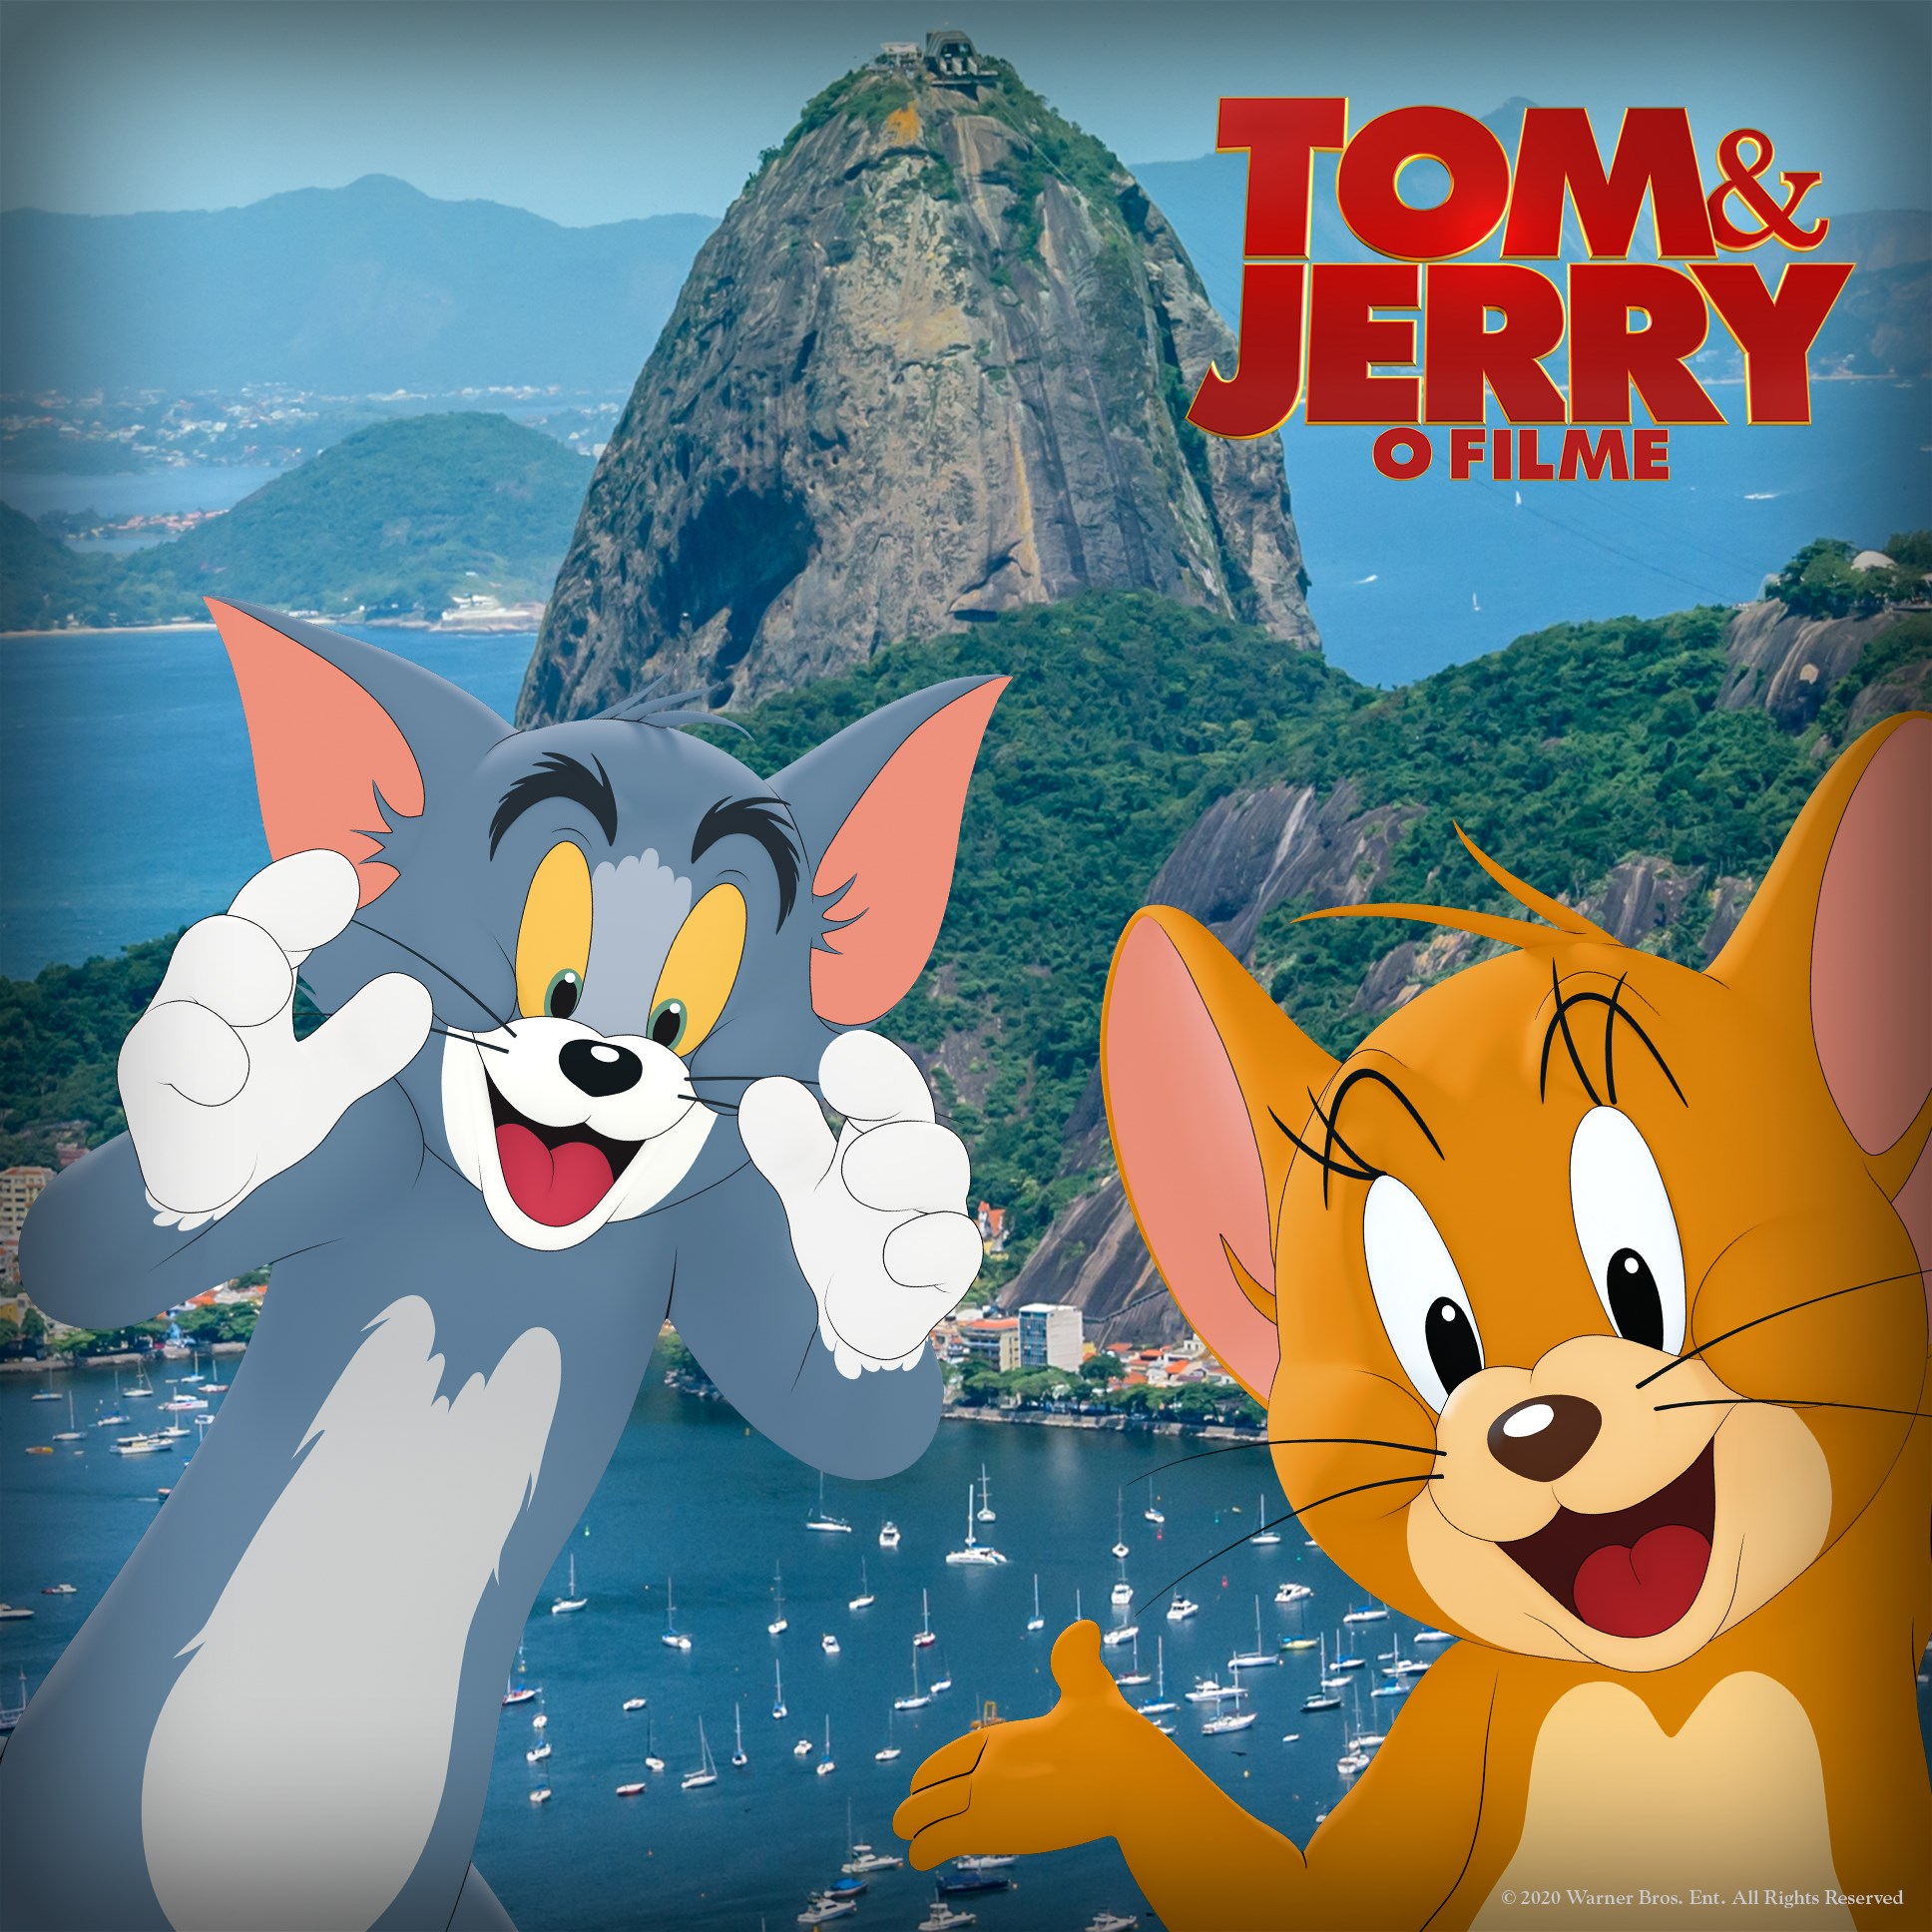 Entertainment News Roundup: Cat-and-mouse hijinks return in new 'Tom &  Jerry' movie; Top Amazon India executive questioned by police over video  series and more | Entertainment